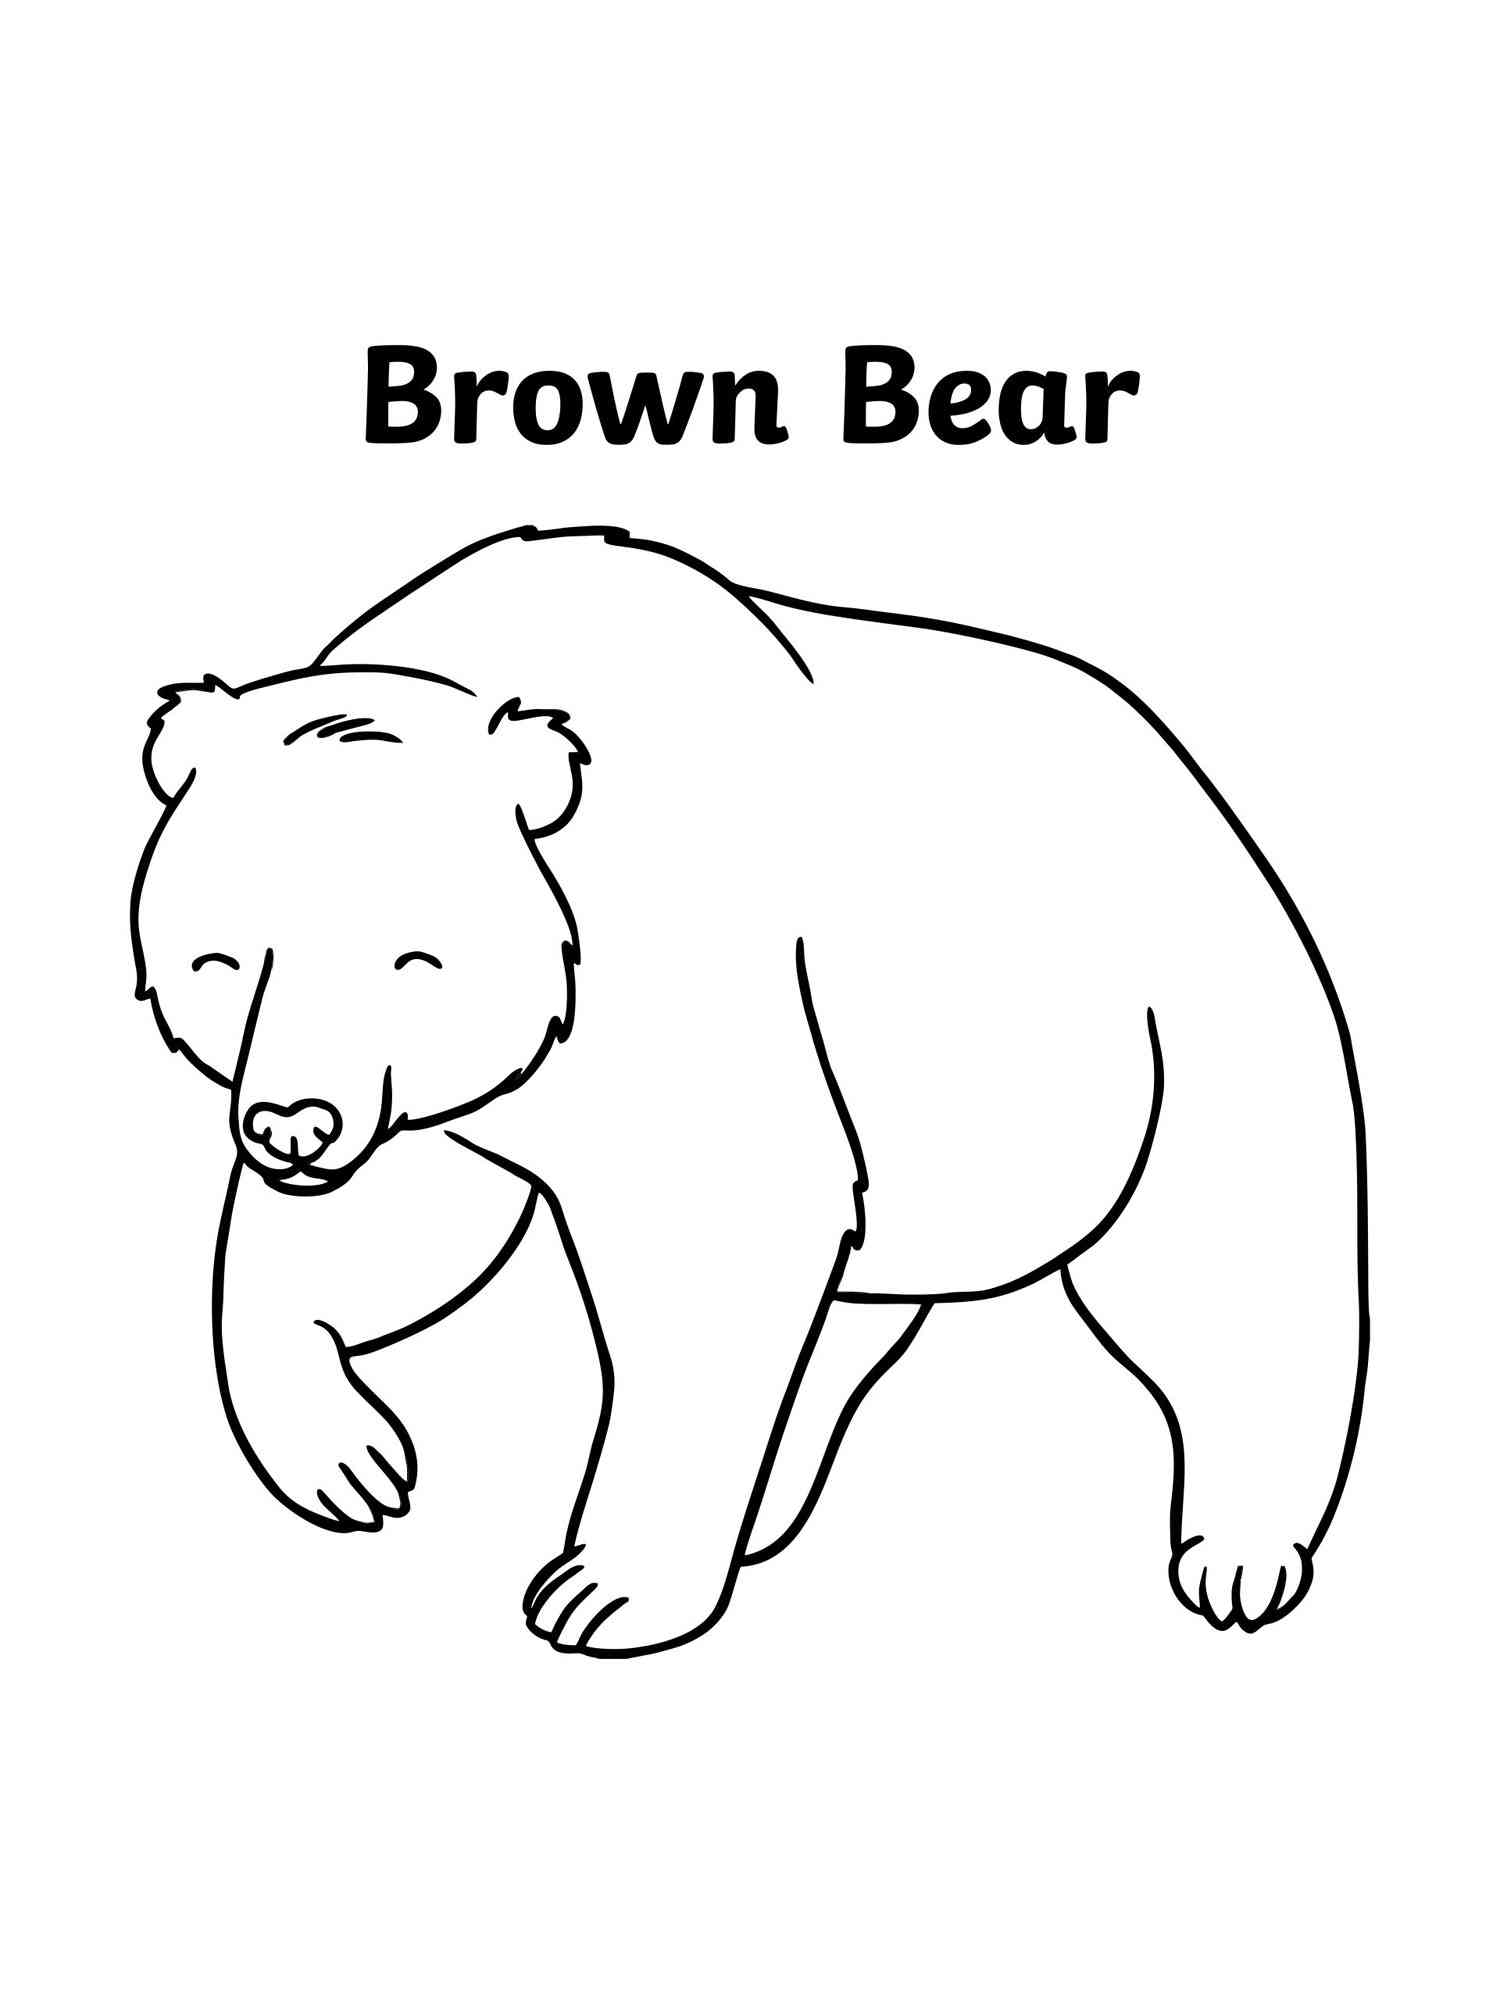 Cute Brown Bear coloring page